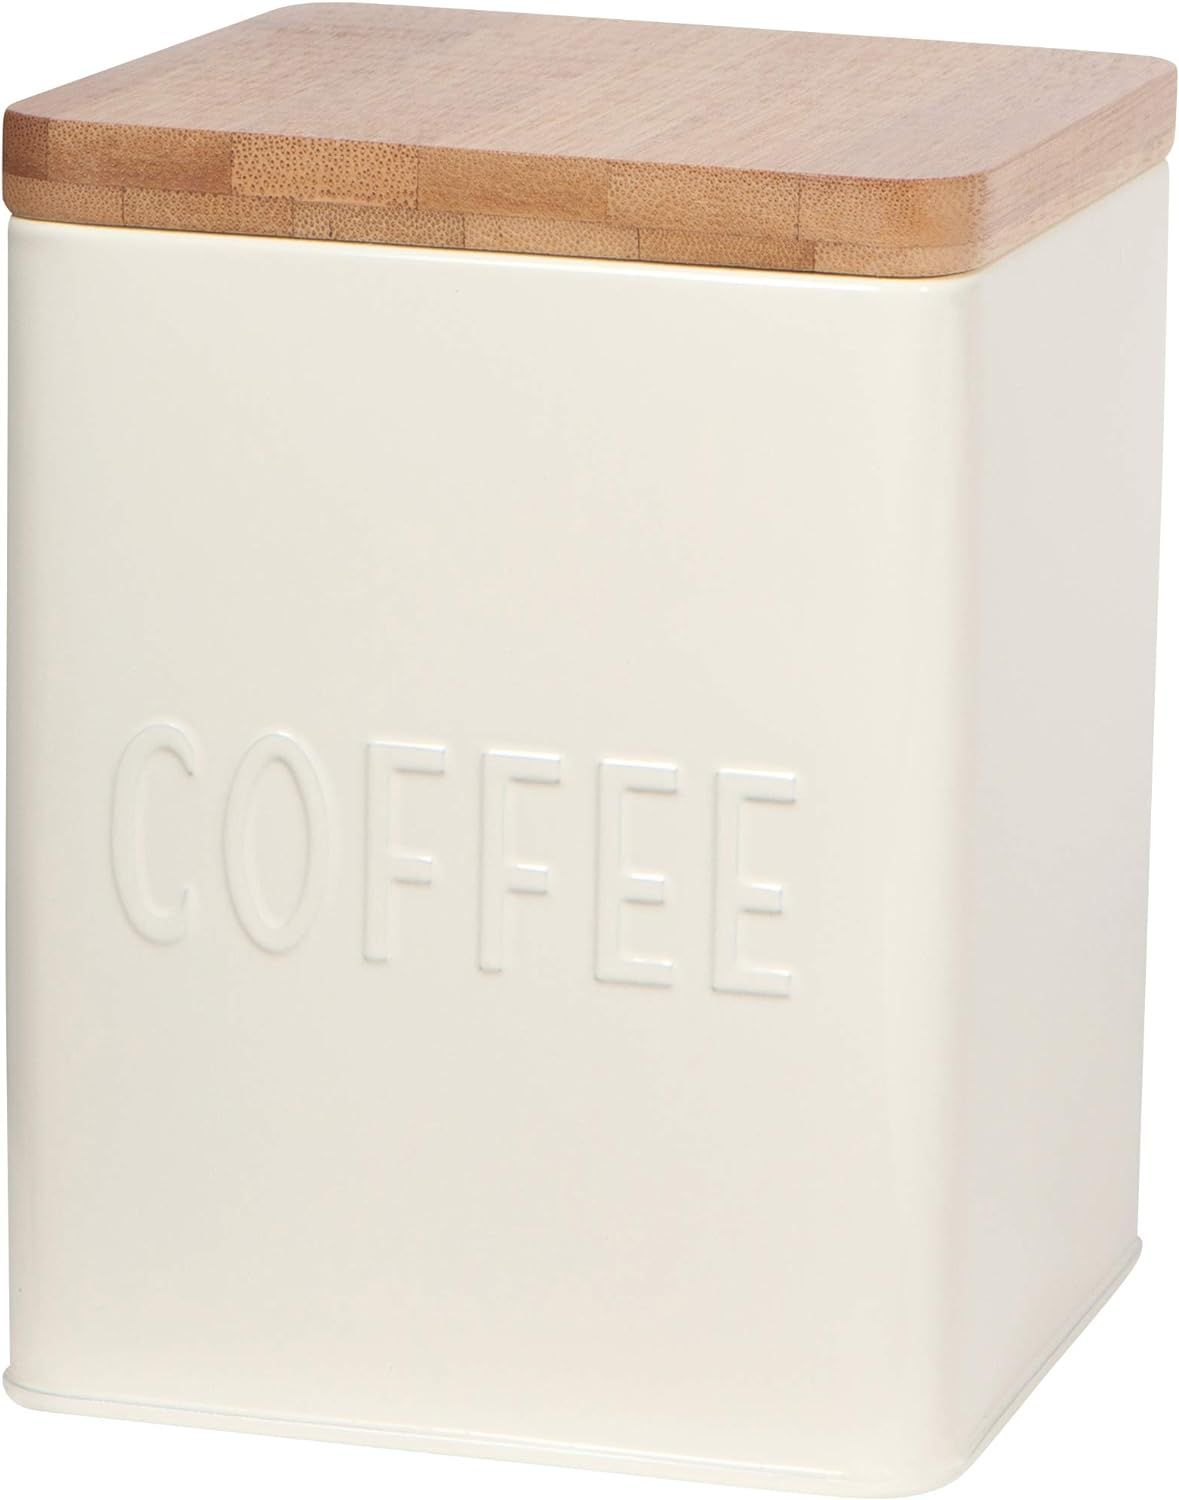 Now Designs L170001aa Square Coffee Tin, Ivory, Vintage Diner Print | Amazon (US)